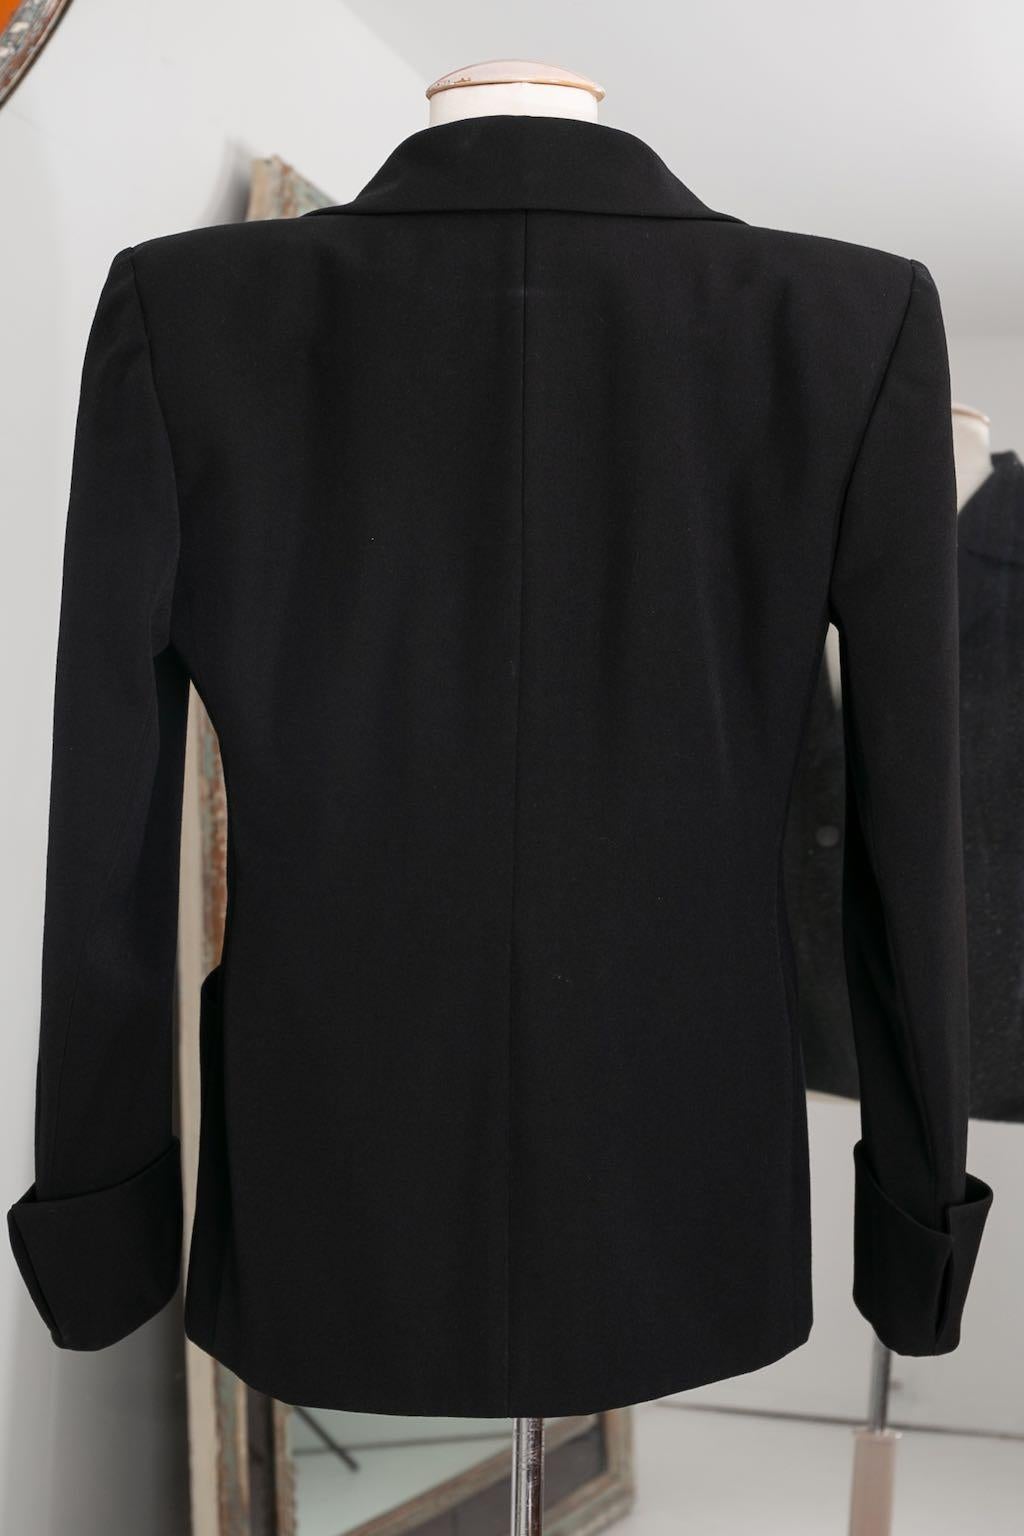 Yves Saint Laurent Haute Couture Black Skirt and Jacket Set, circa 1981/1982 For Sale 11